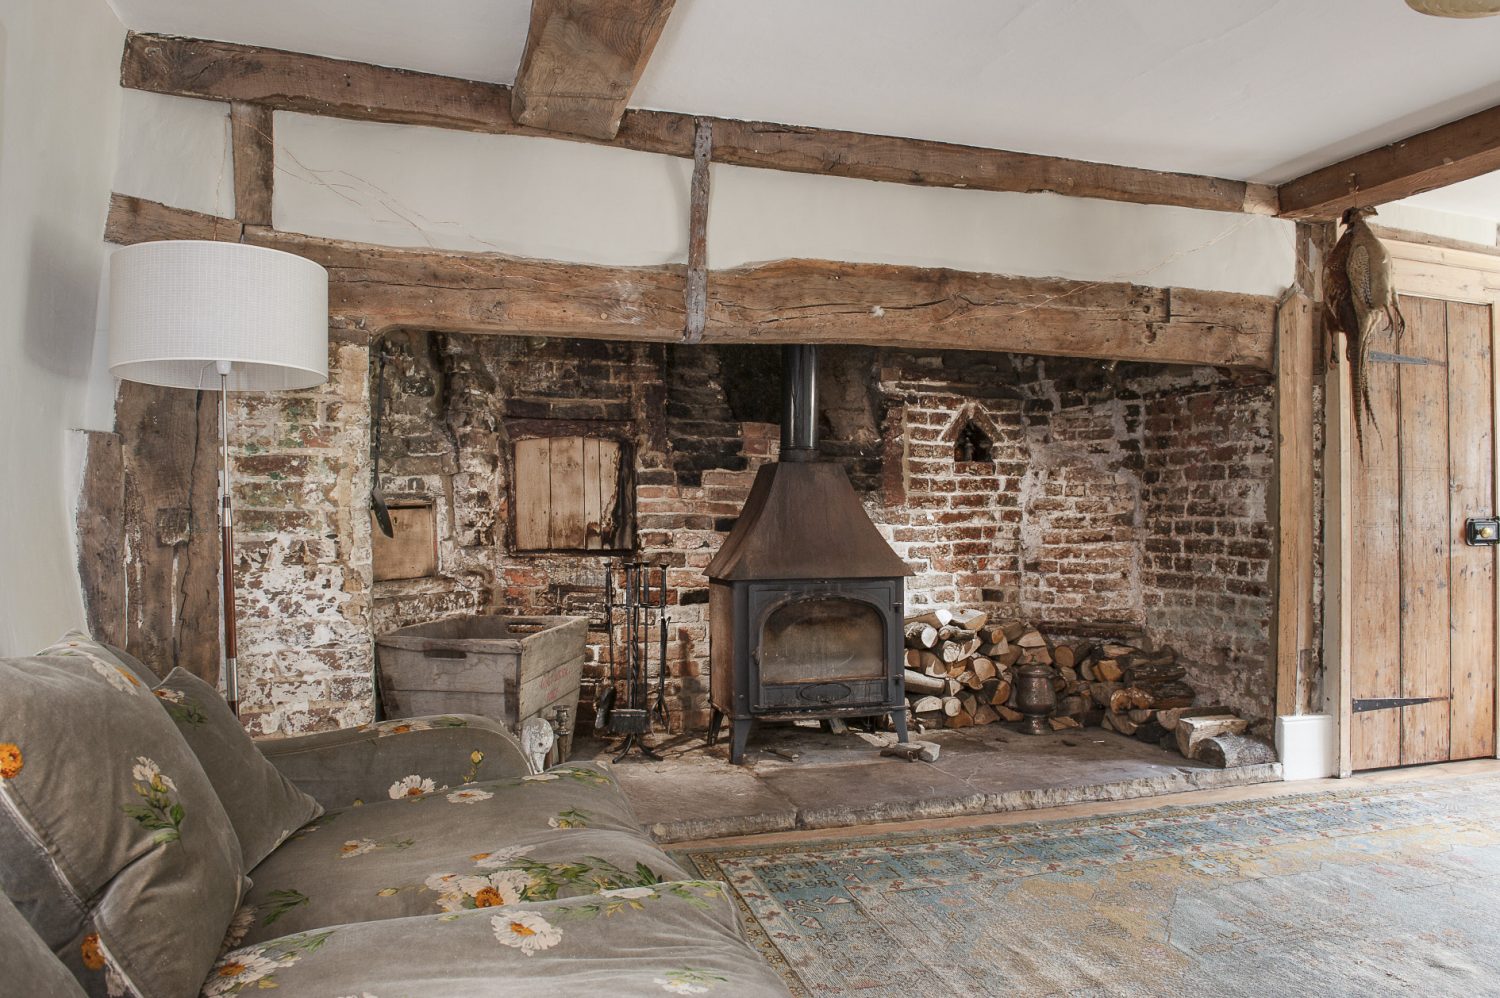 The heavily beamed 16th century drawing room is home to a huge inglenook, complete with bread oven, that extends two thirds of the length of the room